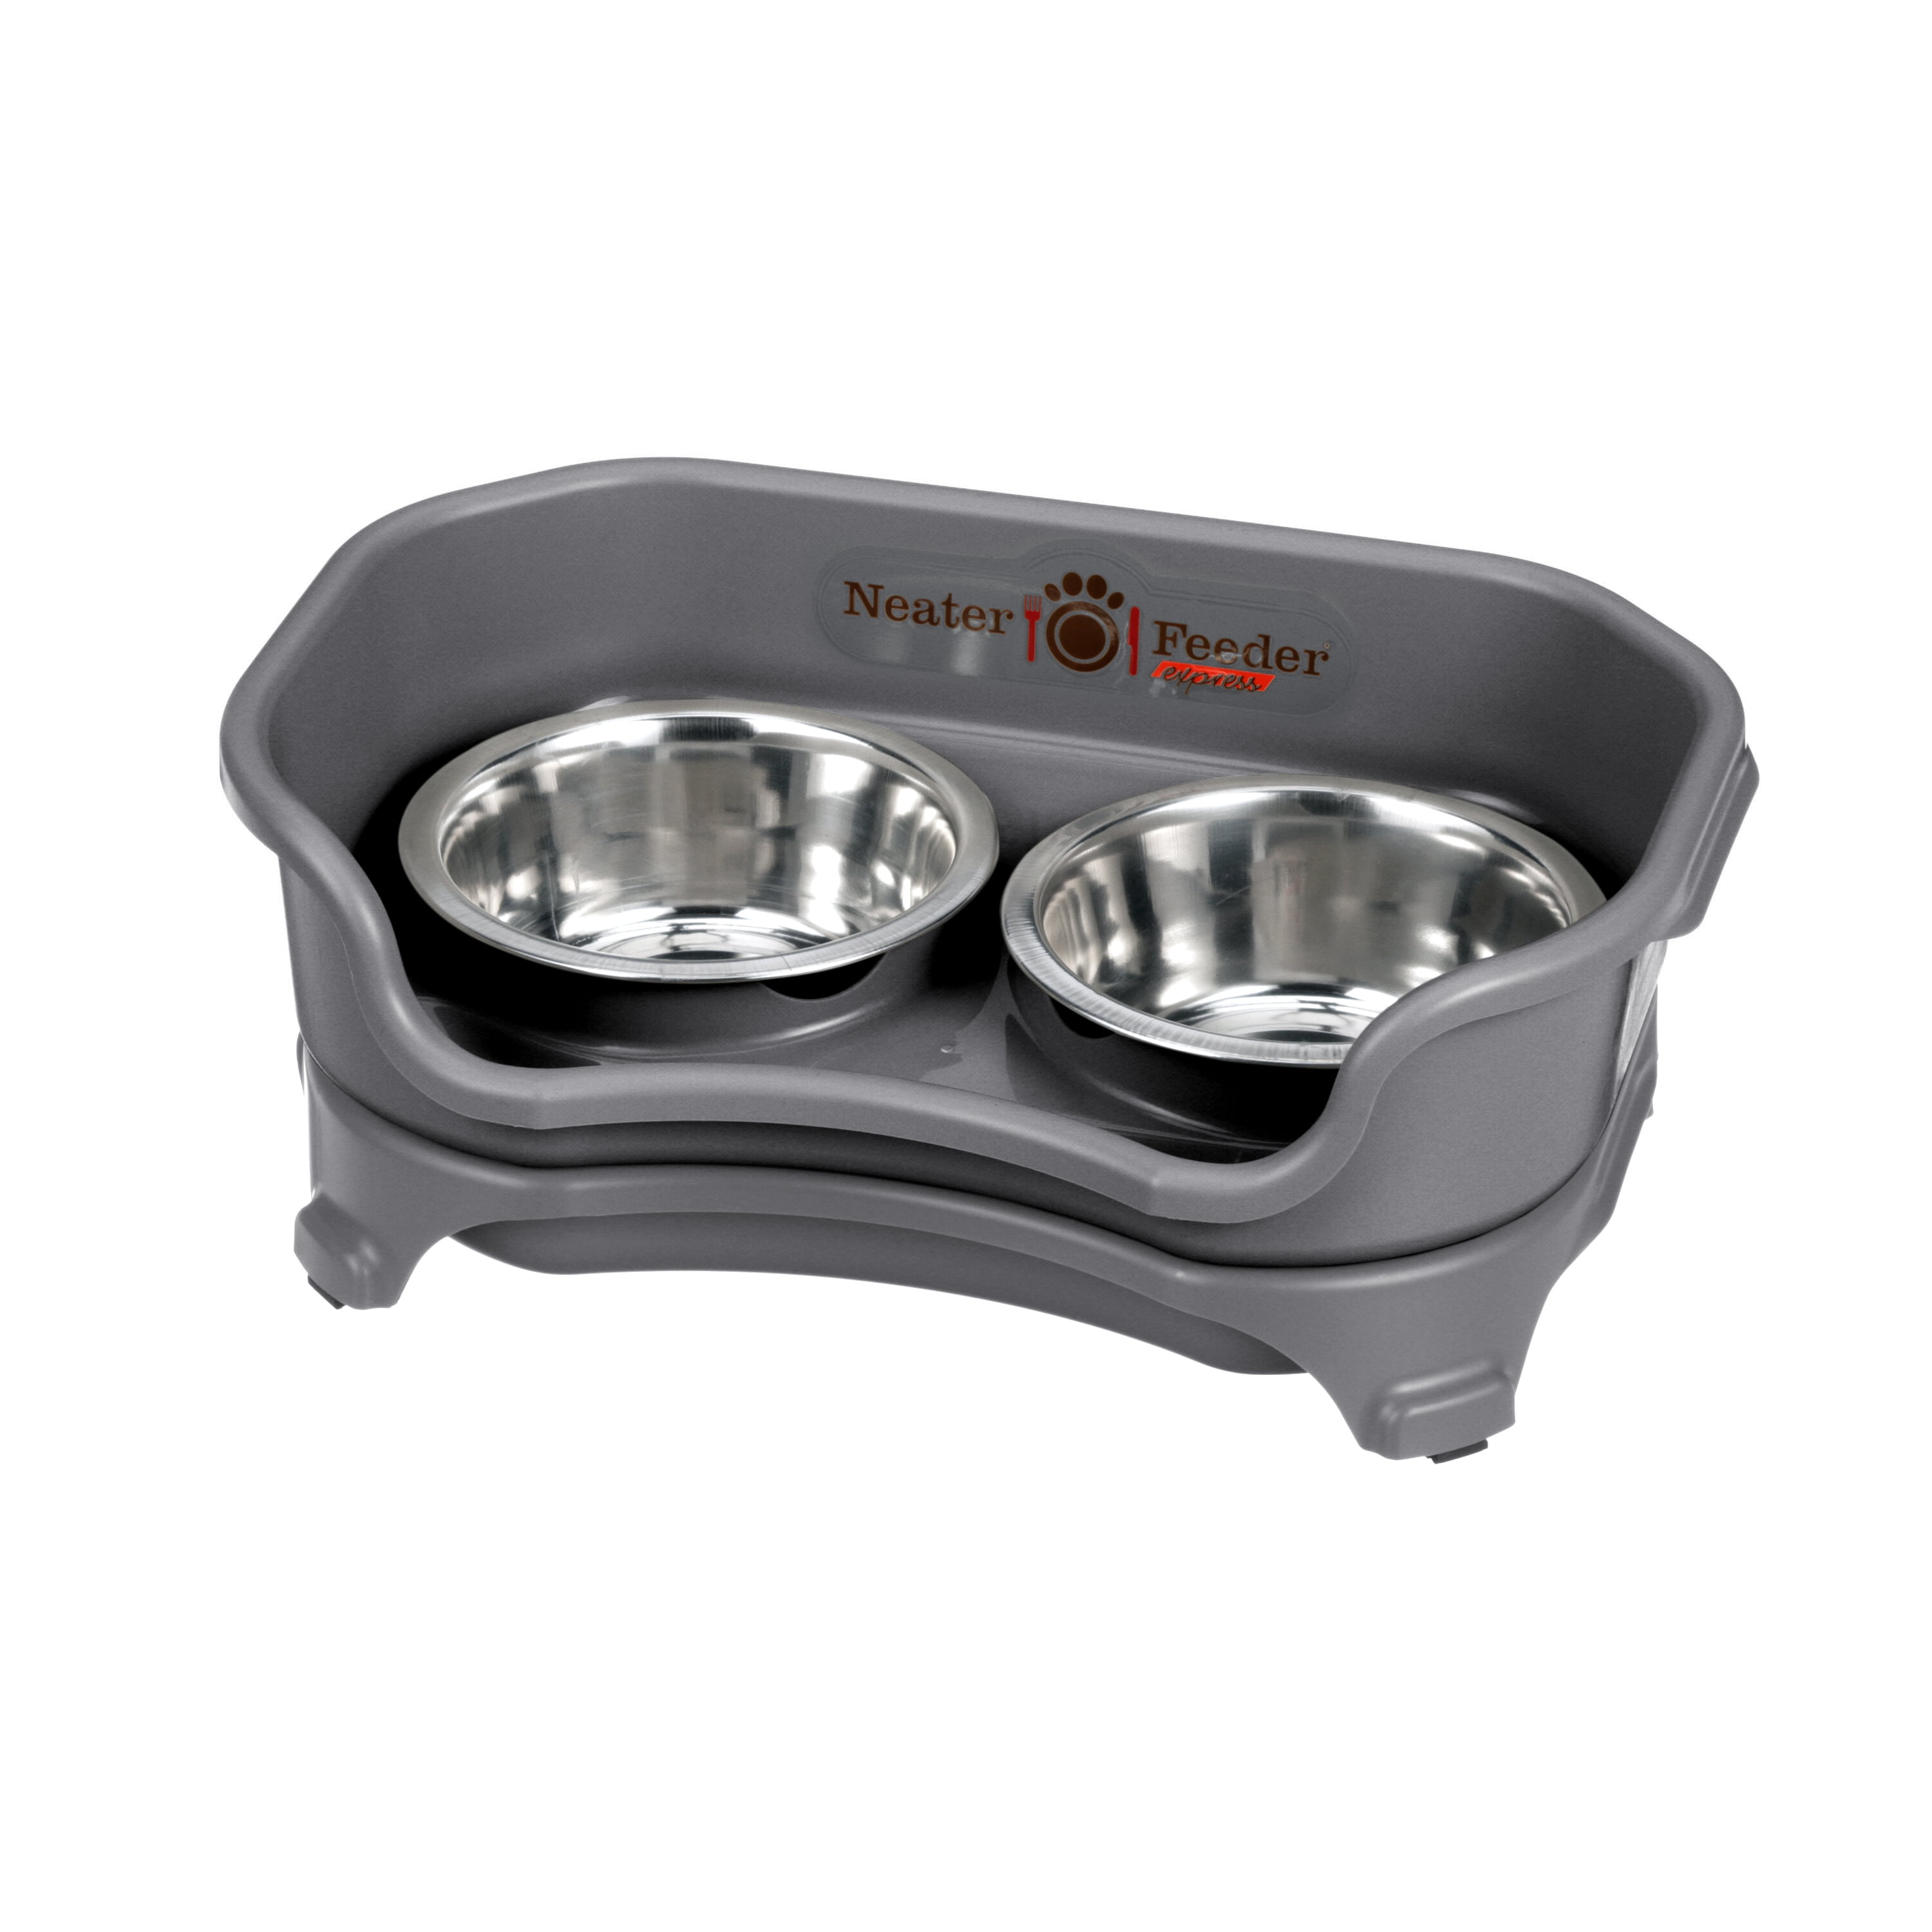 Neater Feeder ExpressMess Proof Elevated DishStainless Bowls ALL SIZES 